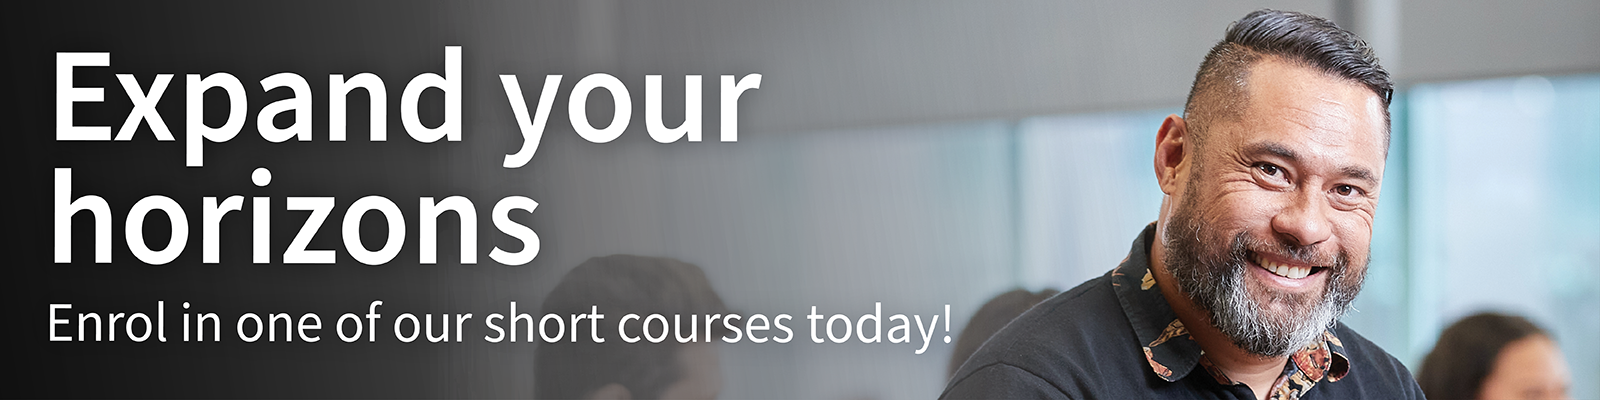 Expand Your Horizons with a Wintec Short Course